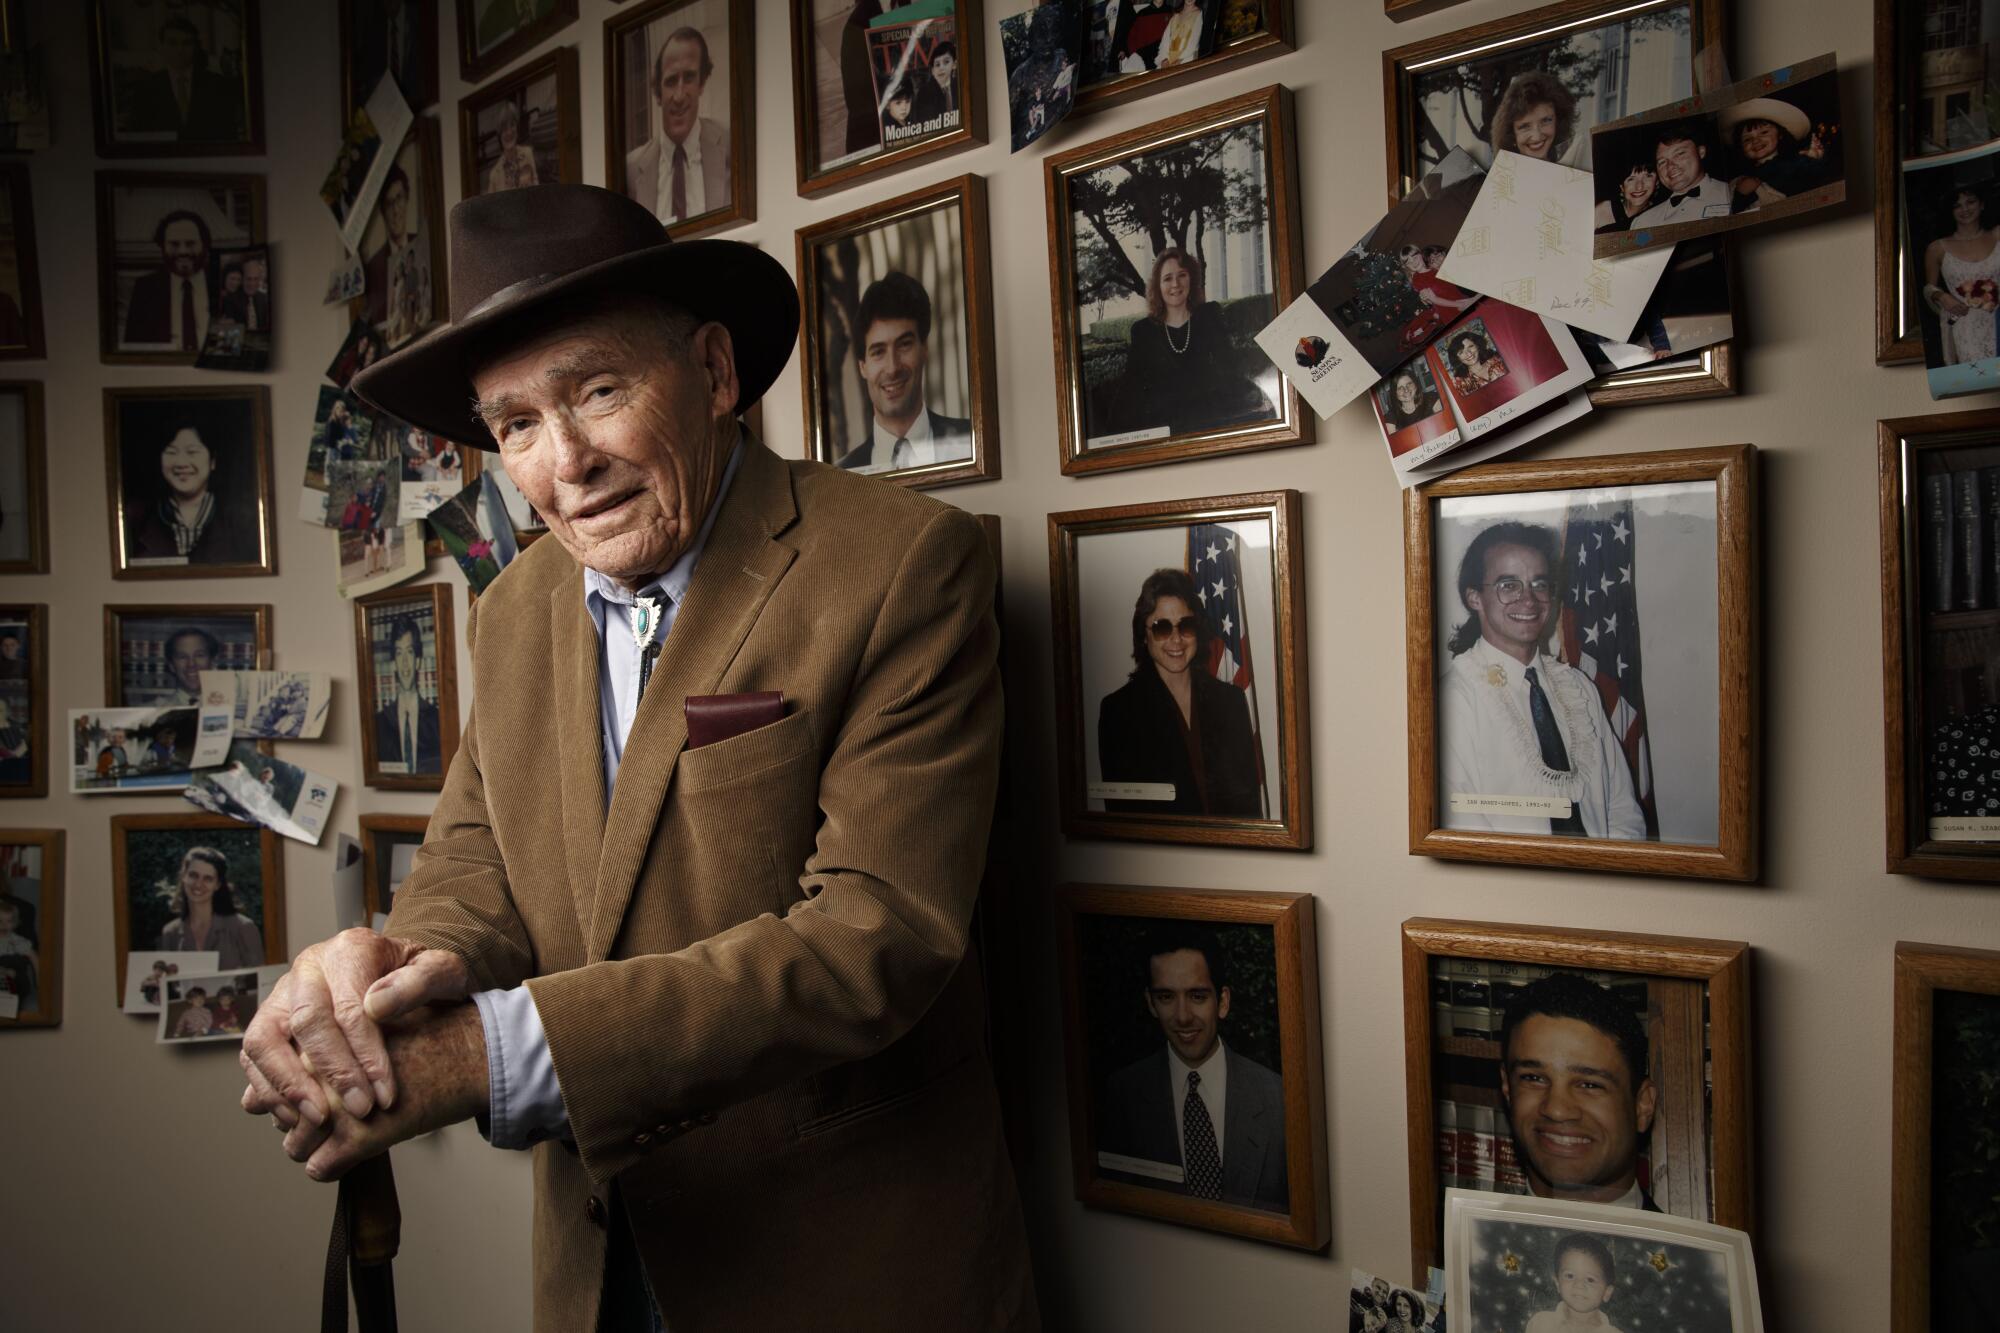 Judge Harry Pregerson, in a brown hat and blazer, stands with his hands on a cane, dozens of portraits on the wall behind him